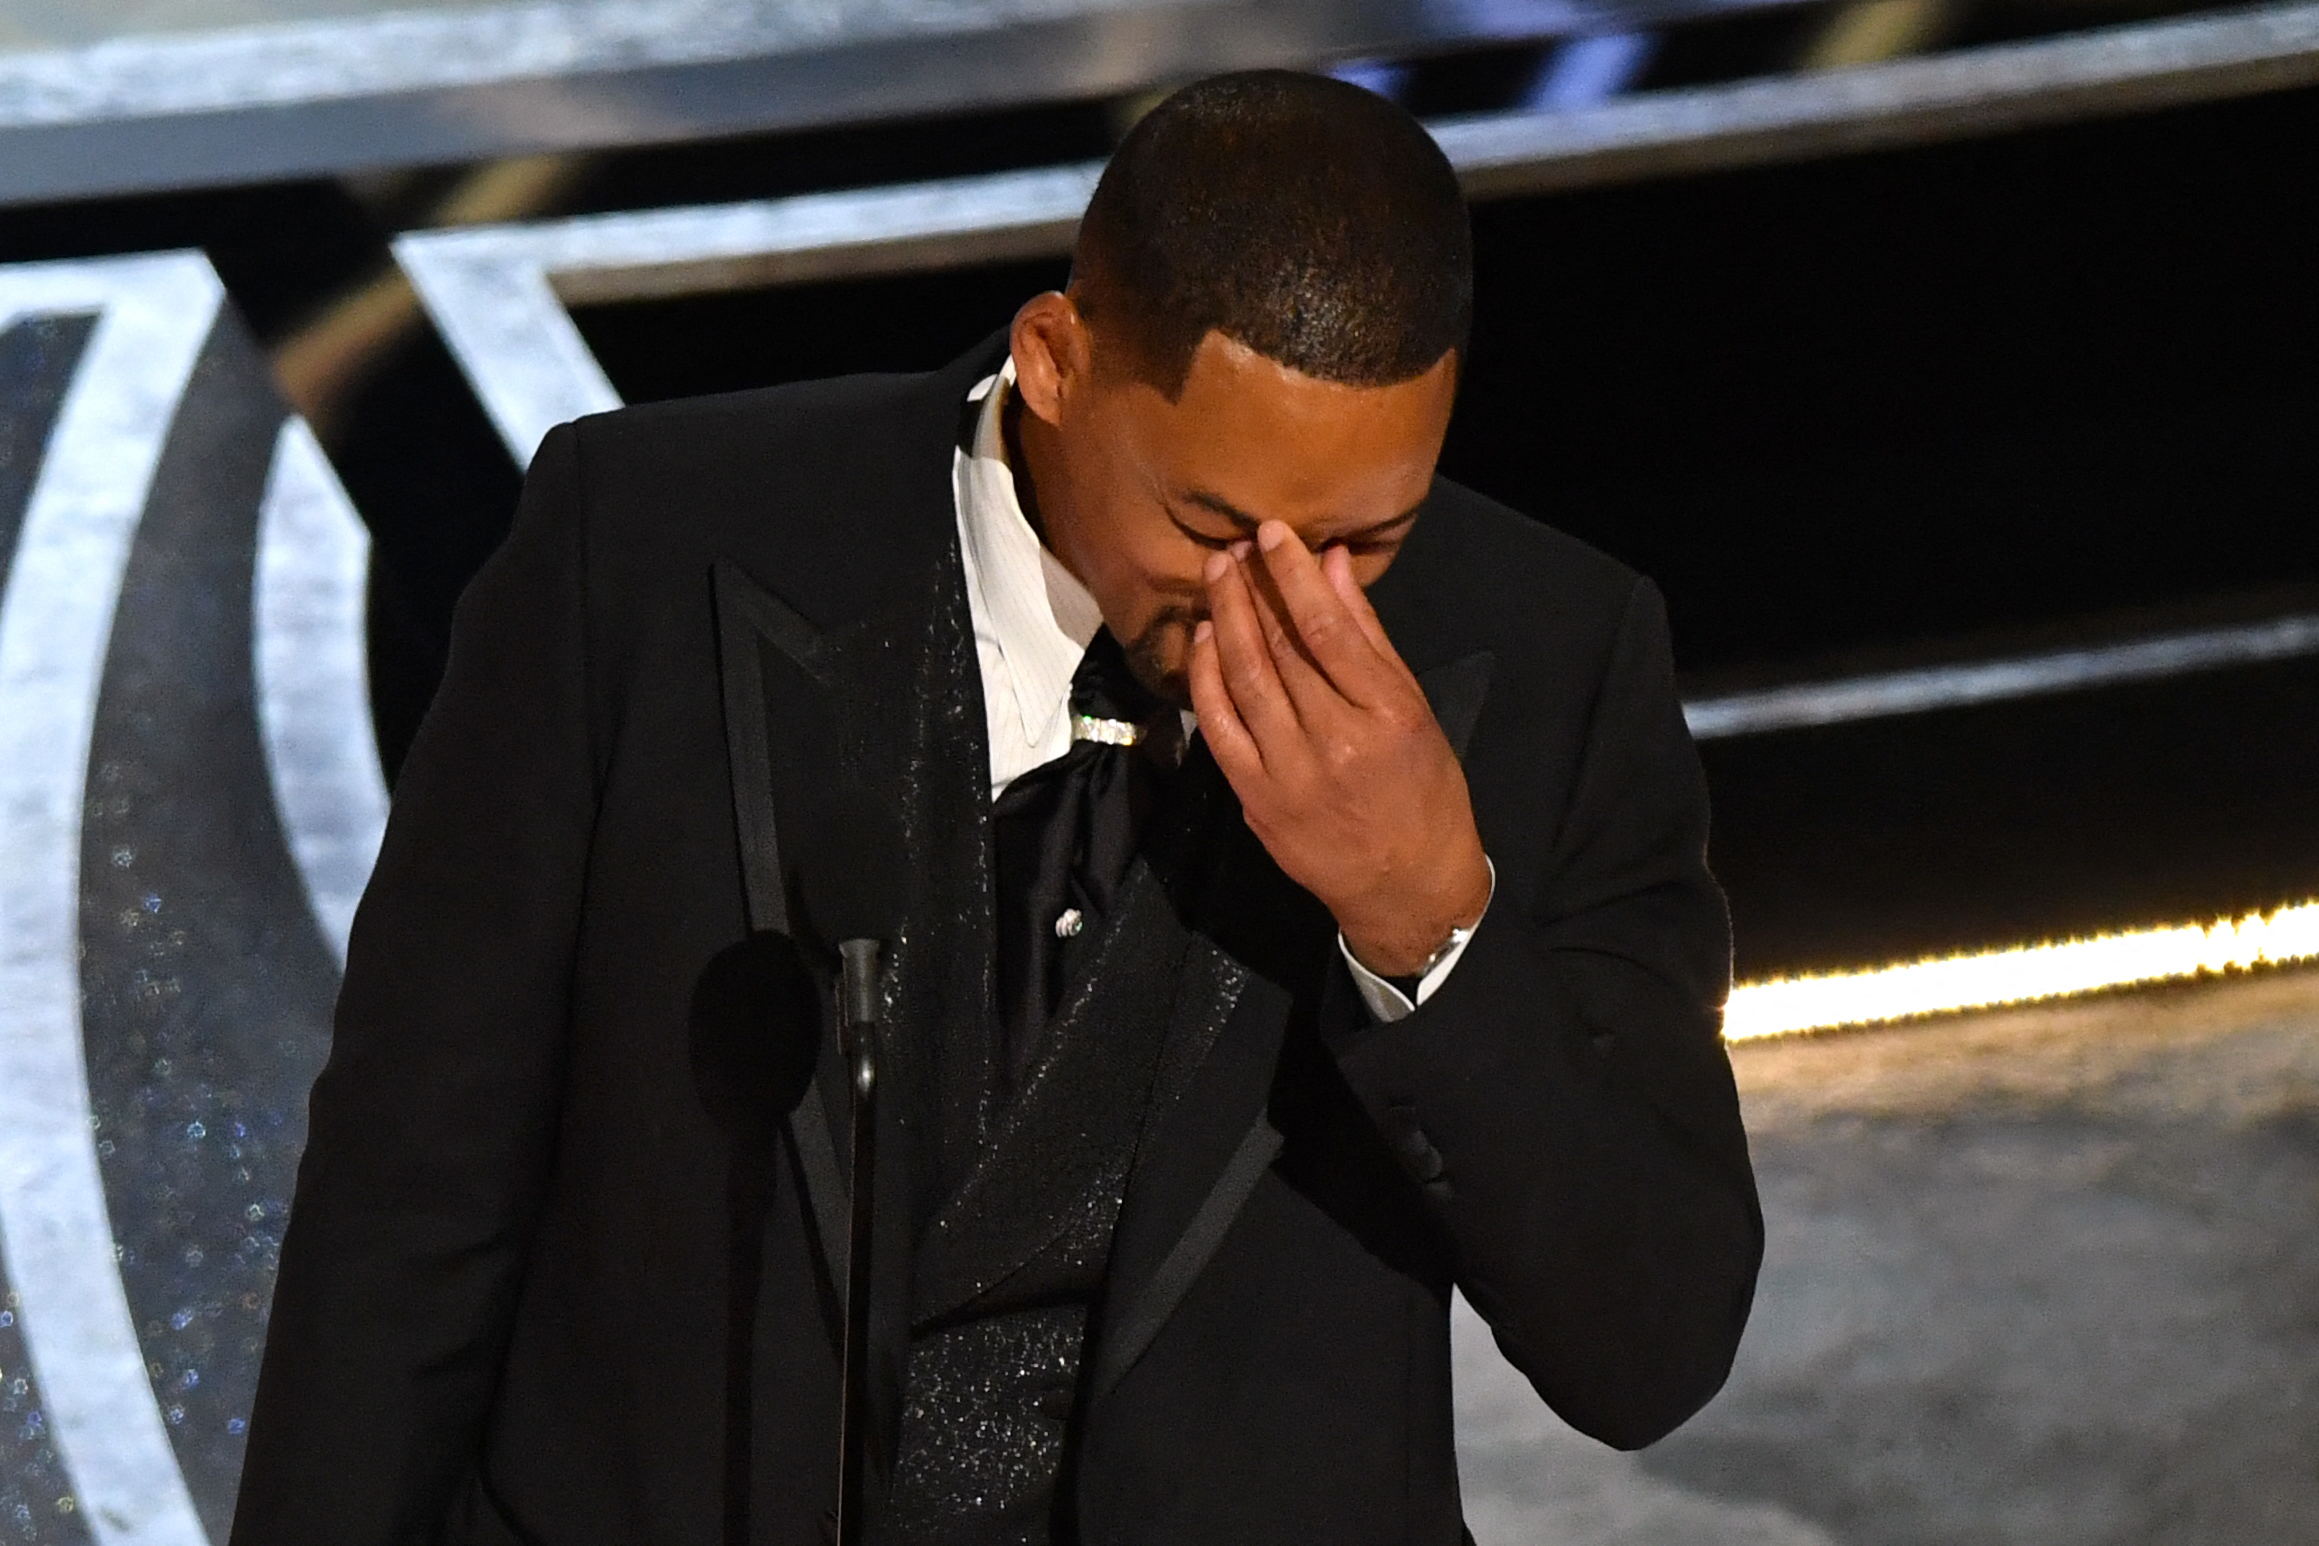 Will Smith be right to hit chris rock at the oscars 2022?